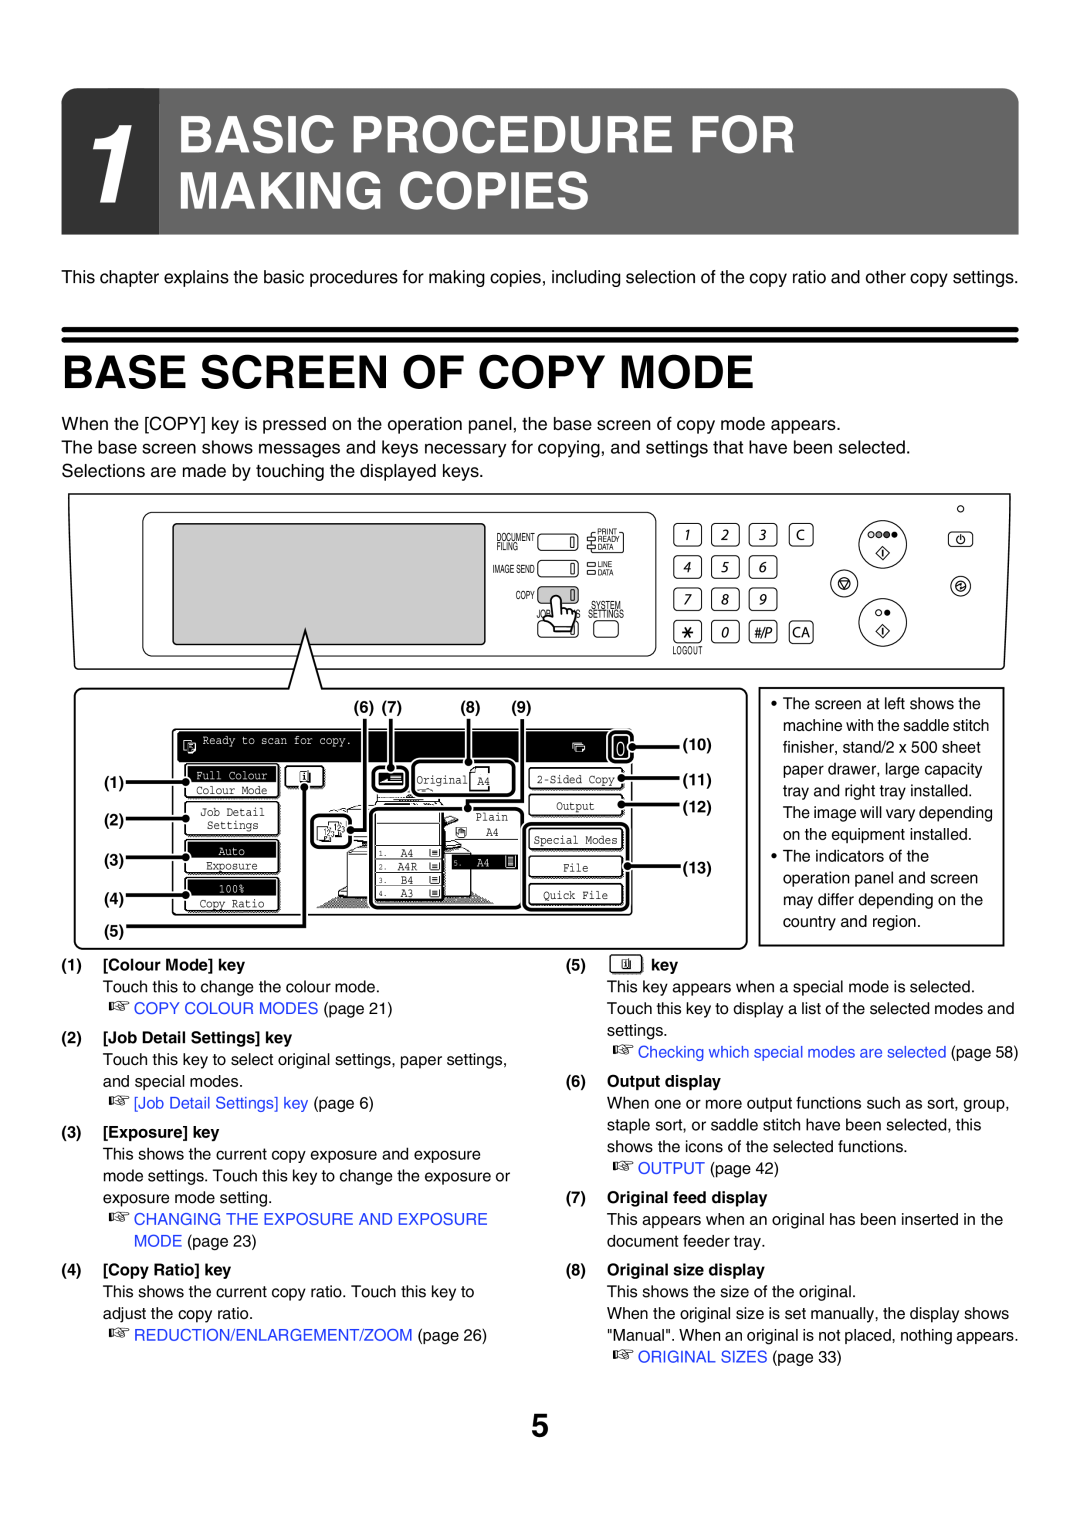 Sharp MX-3500N, MX-4501N, MX-2700N, MX-2300G, MX-3501N, MX-2300N Basic Procedure For Making Copies, Base Screen Of Copy Mode 